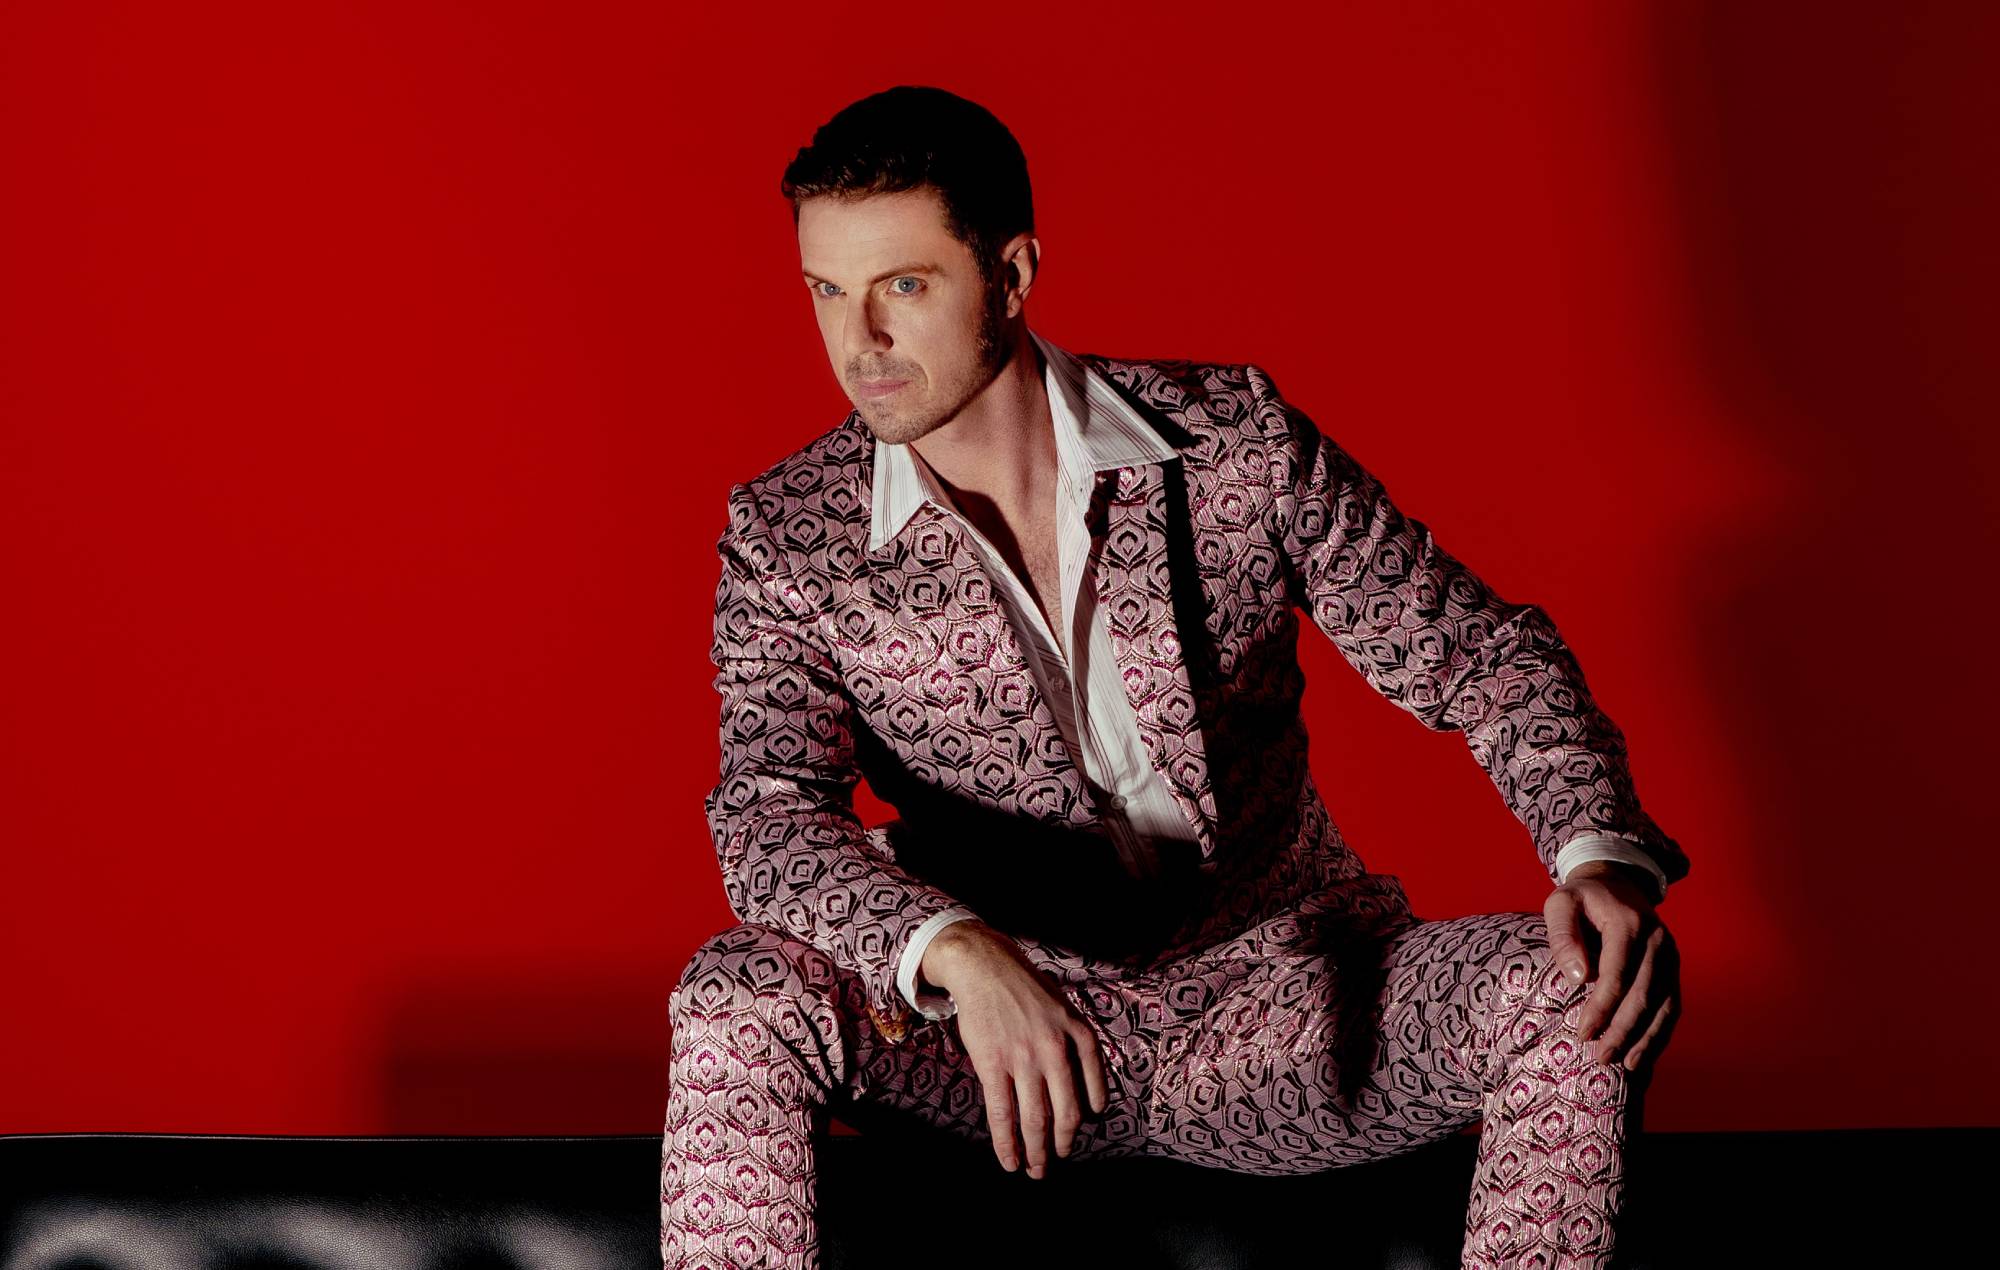 Five things we learned from our In Conversation video chat with Jake Shears